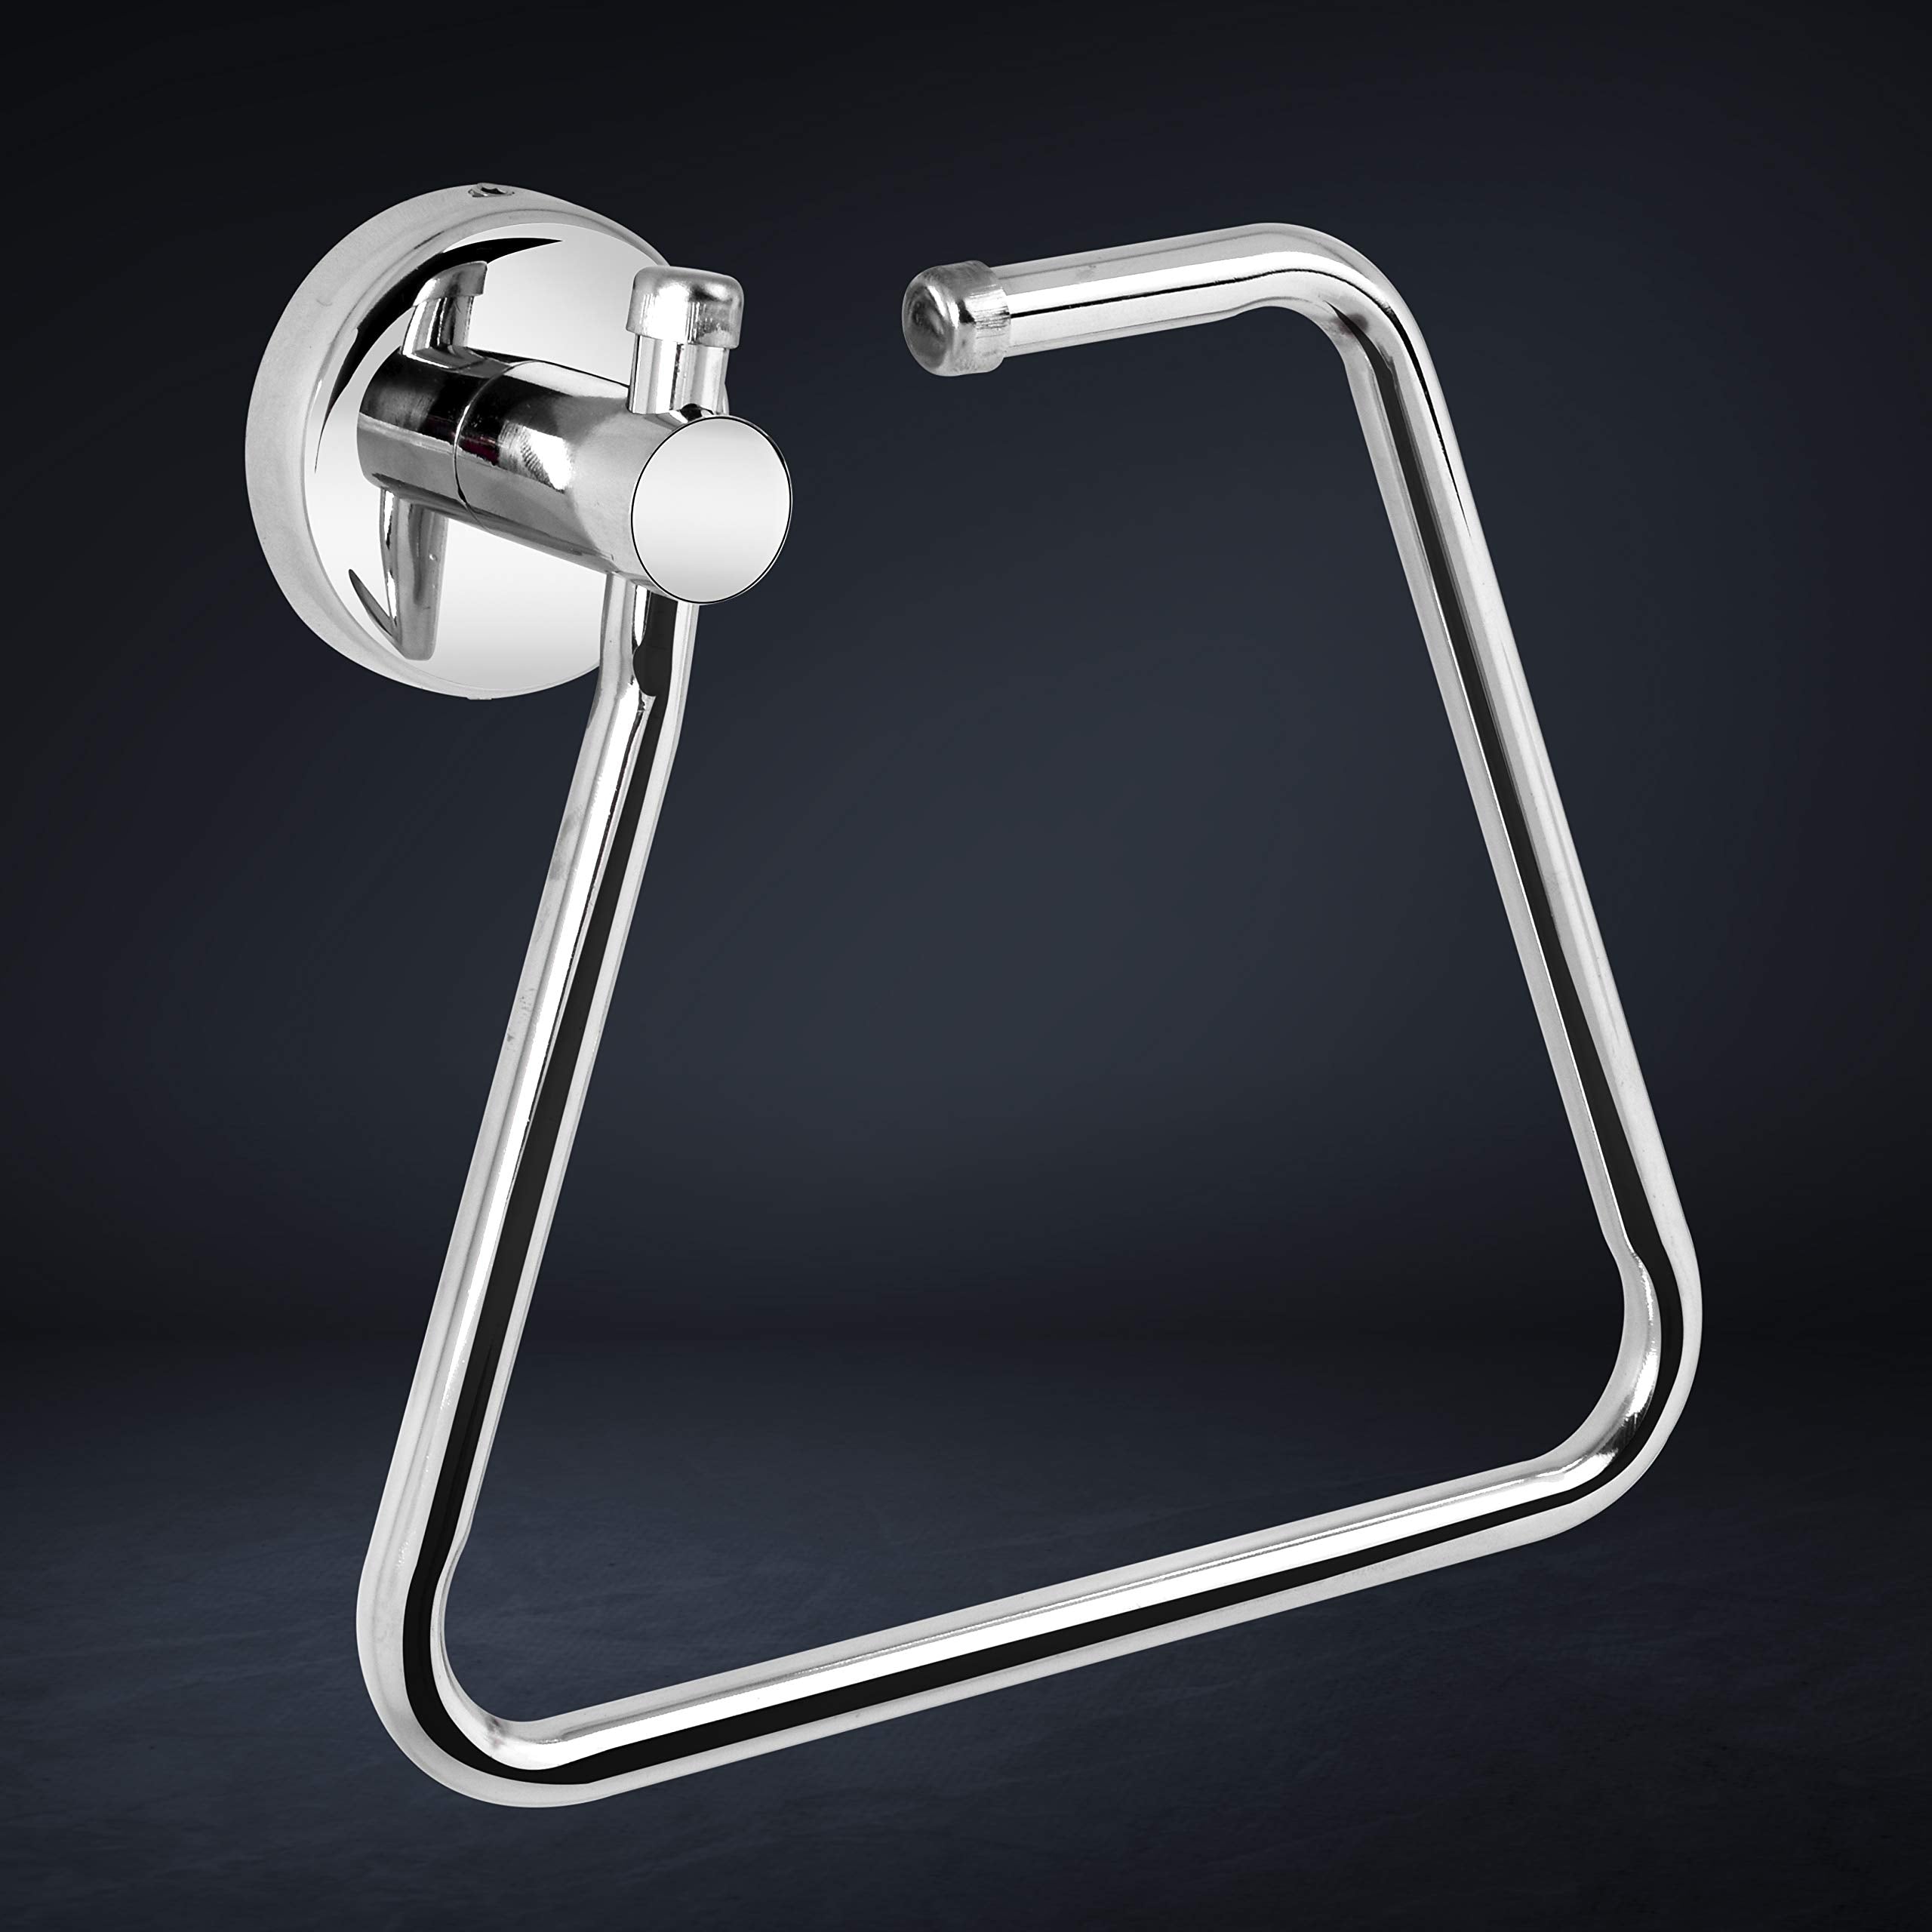 Plantex Stainless Steel Towel Ring for Bathroom/ Napkin-Towel Hanger/Wash Basin/Bathroom Accessories - (Chrome-Rectangle) - Pack of 2